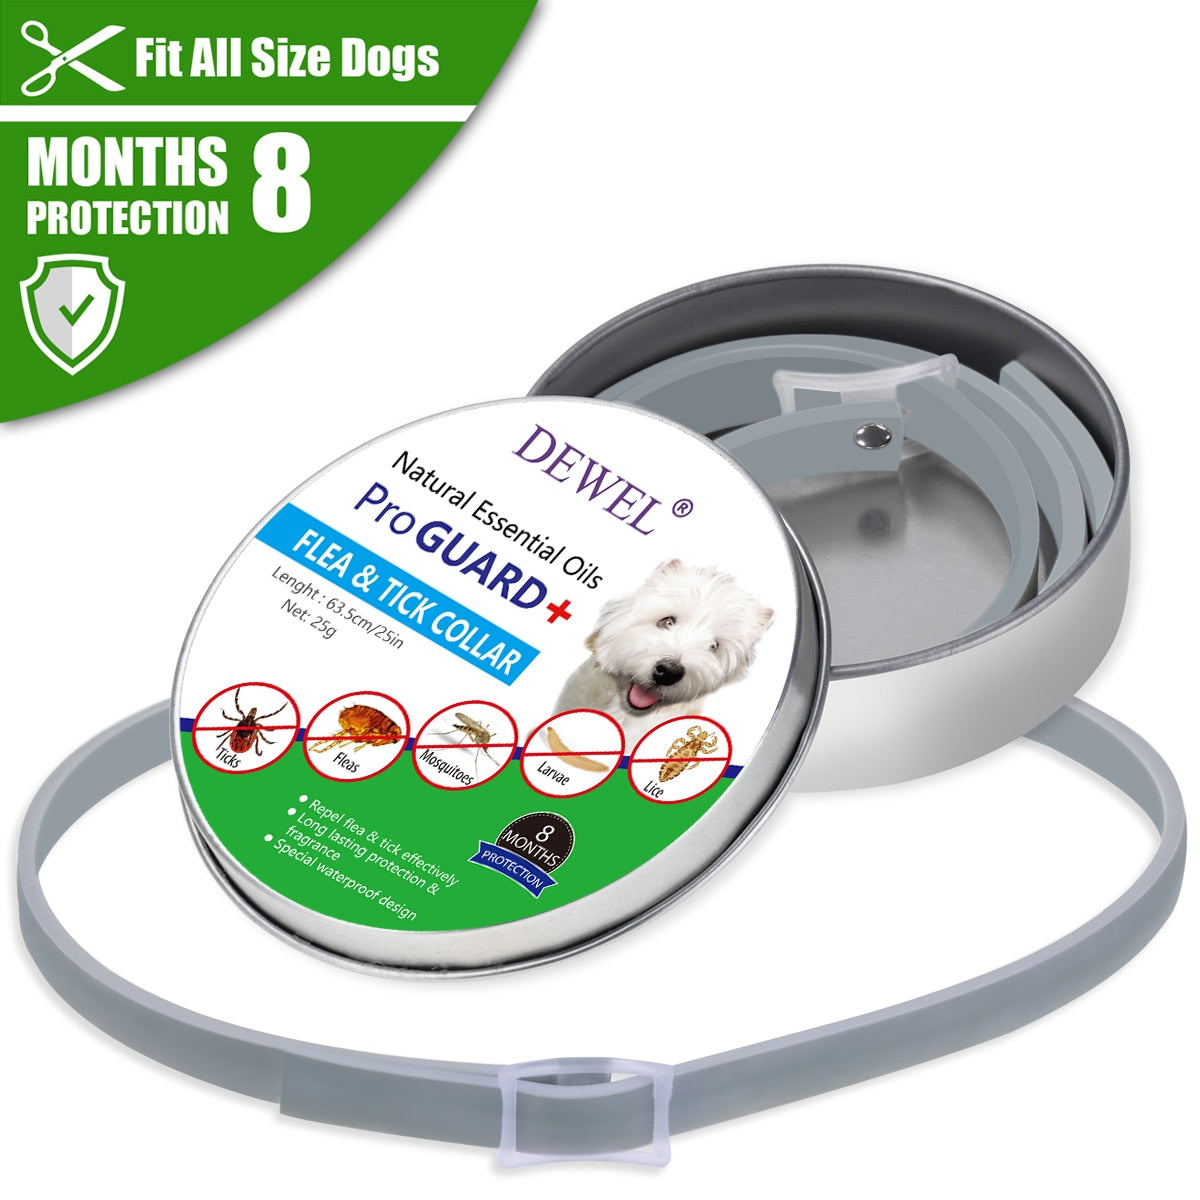 Anti-flea and insect collar - 8 month protection